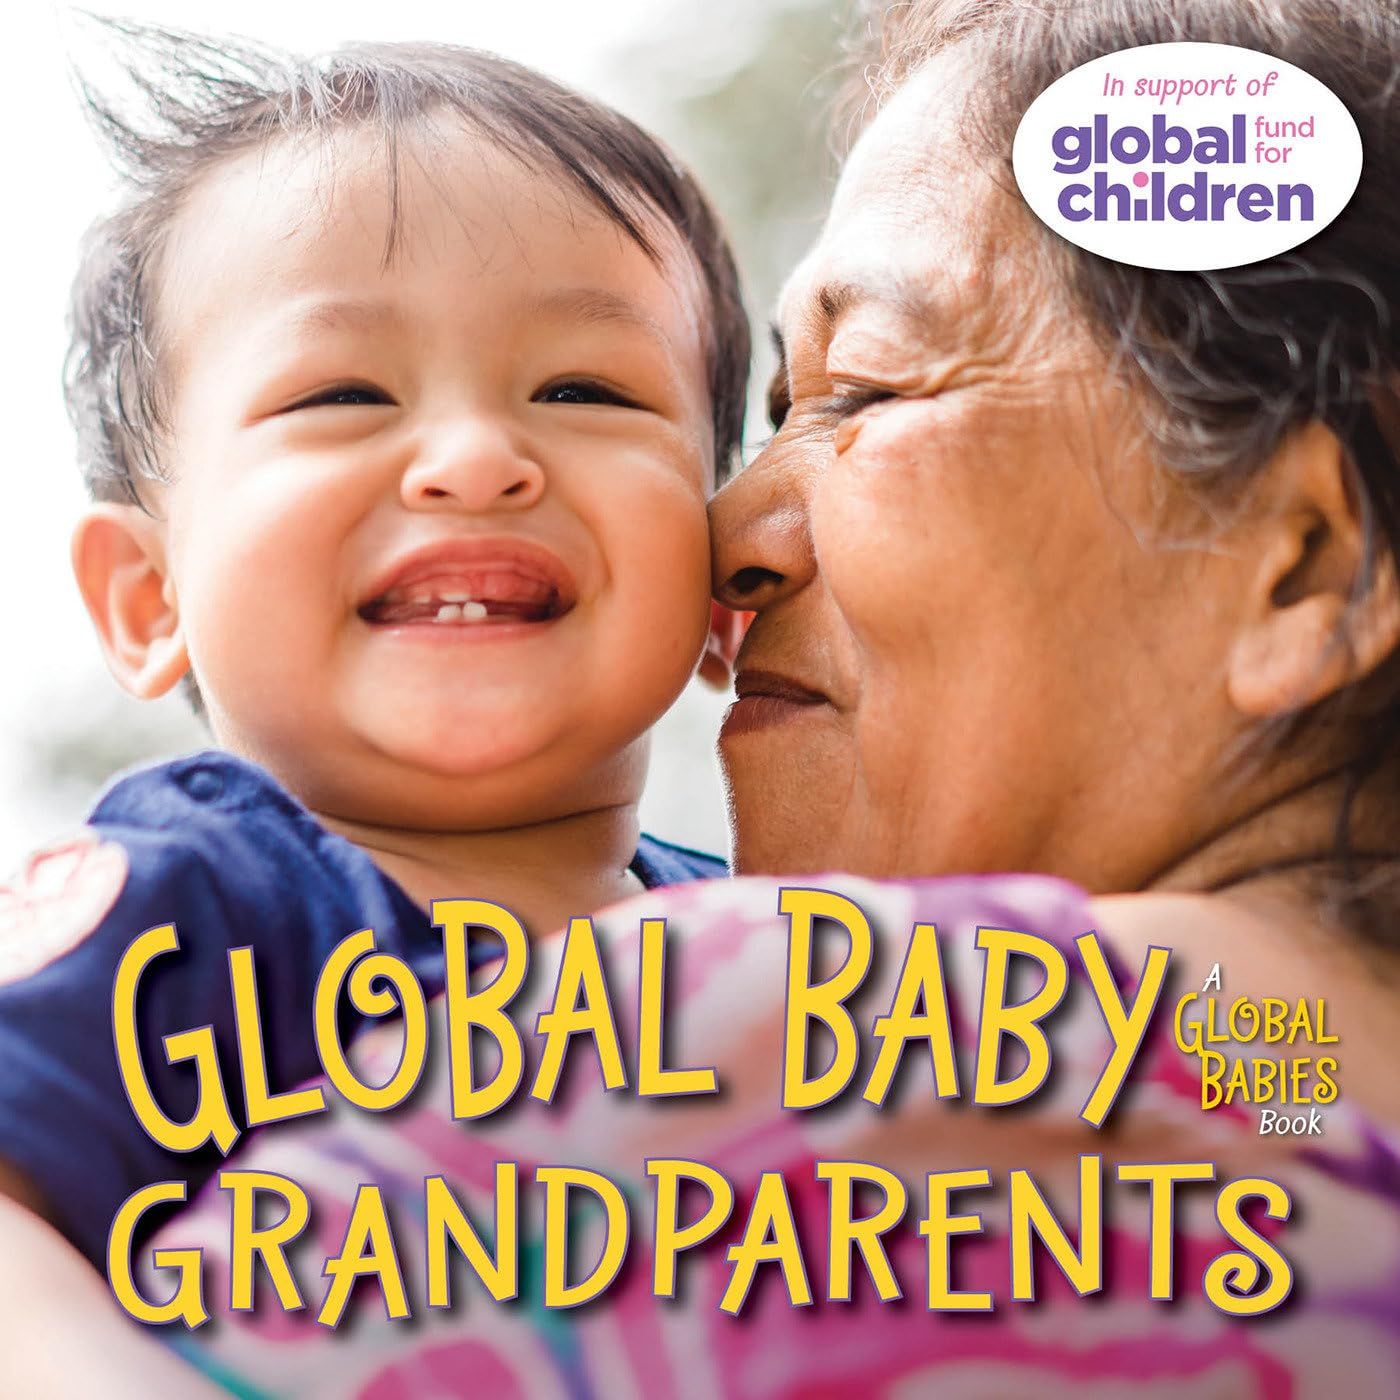 Cover of Global Baby Grandparents by Maya Ajmera